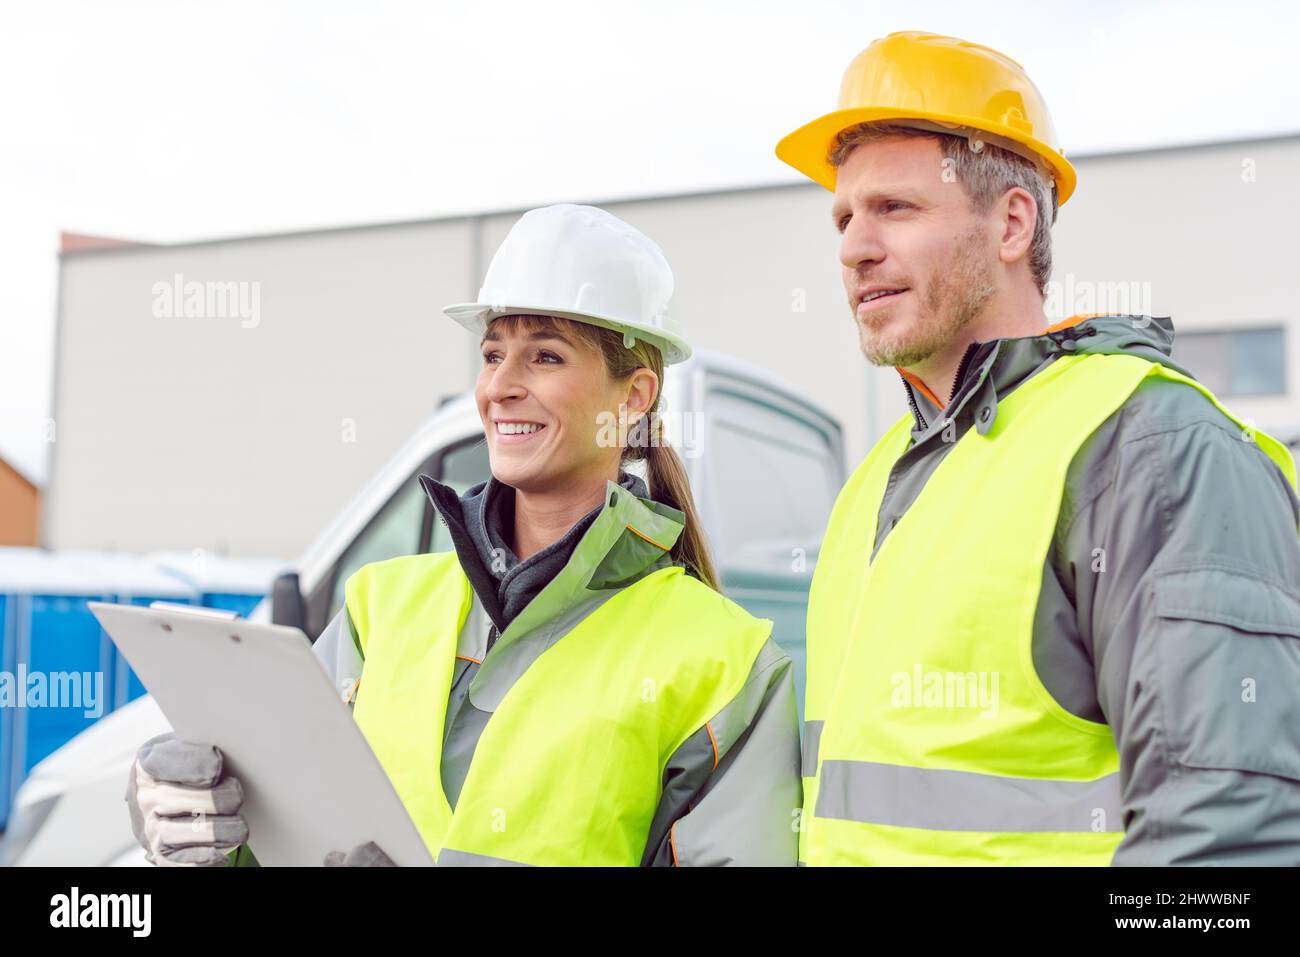 Workers with clipboards standing in front of small truck Stock Photo